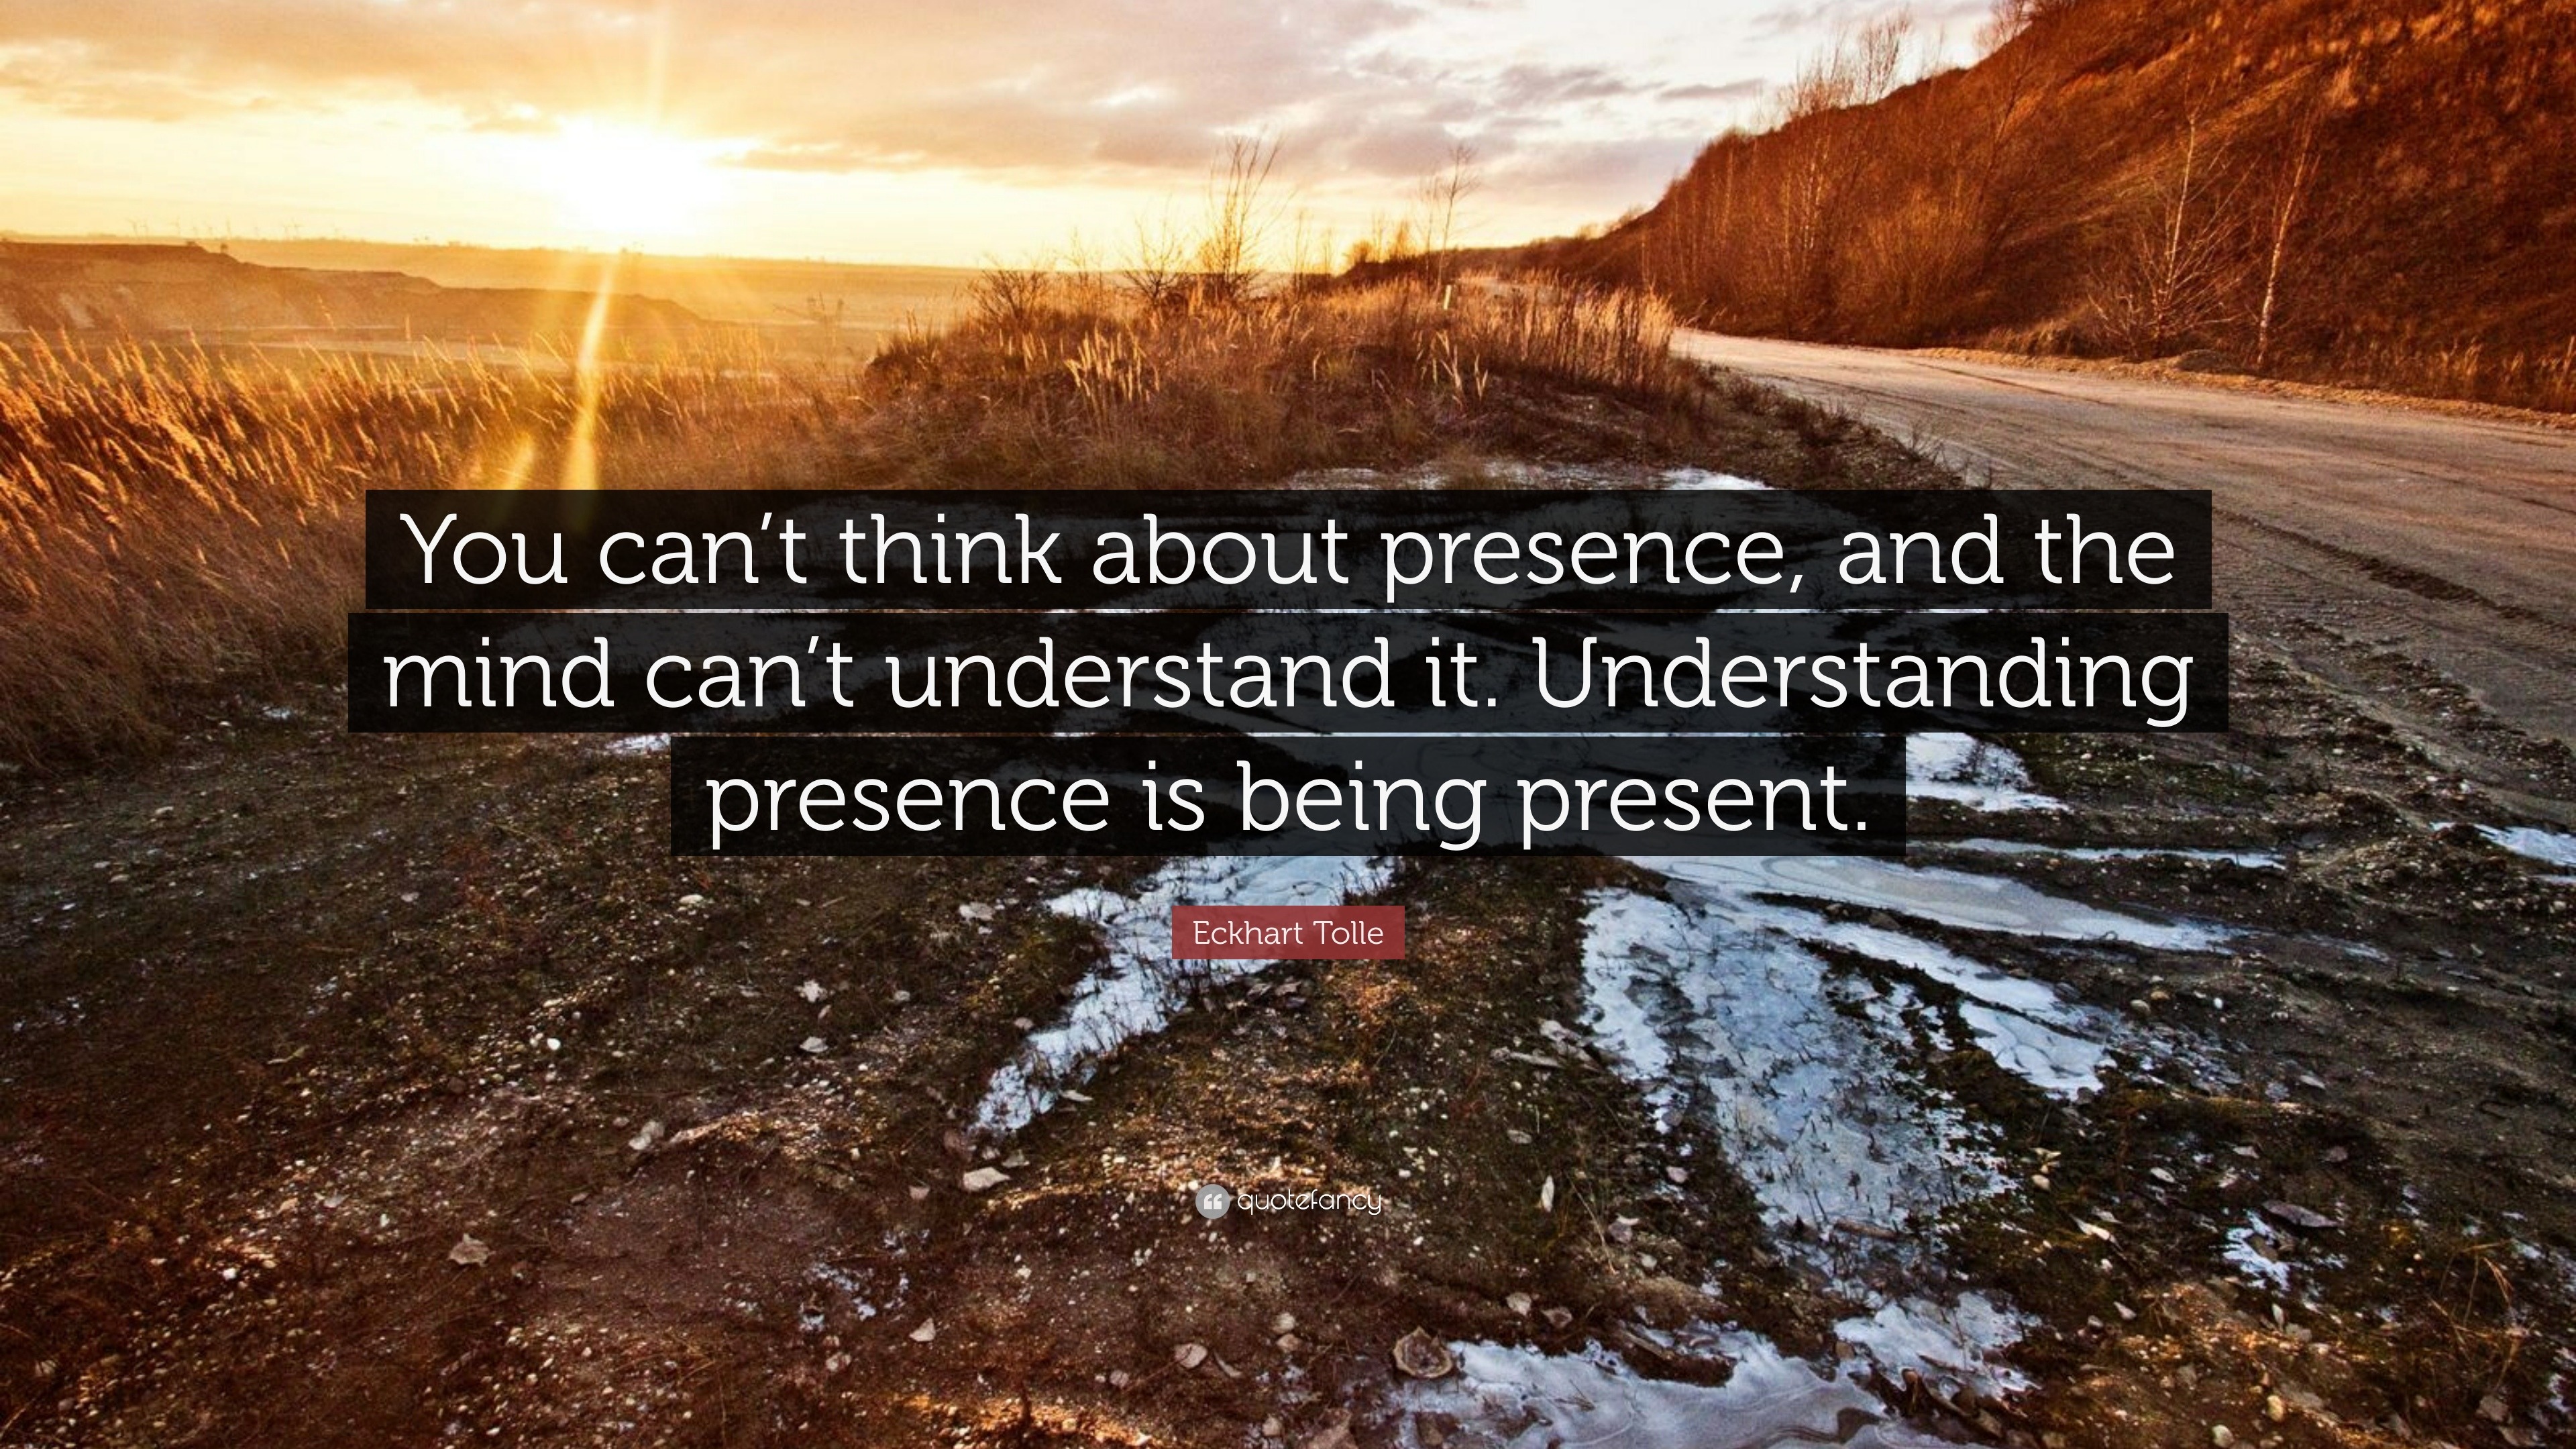 Eckhart Tolle Quote “You can’t think about presence, and the mind can